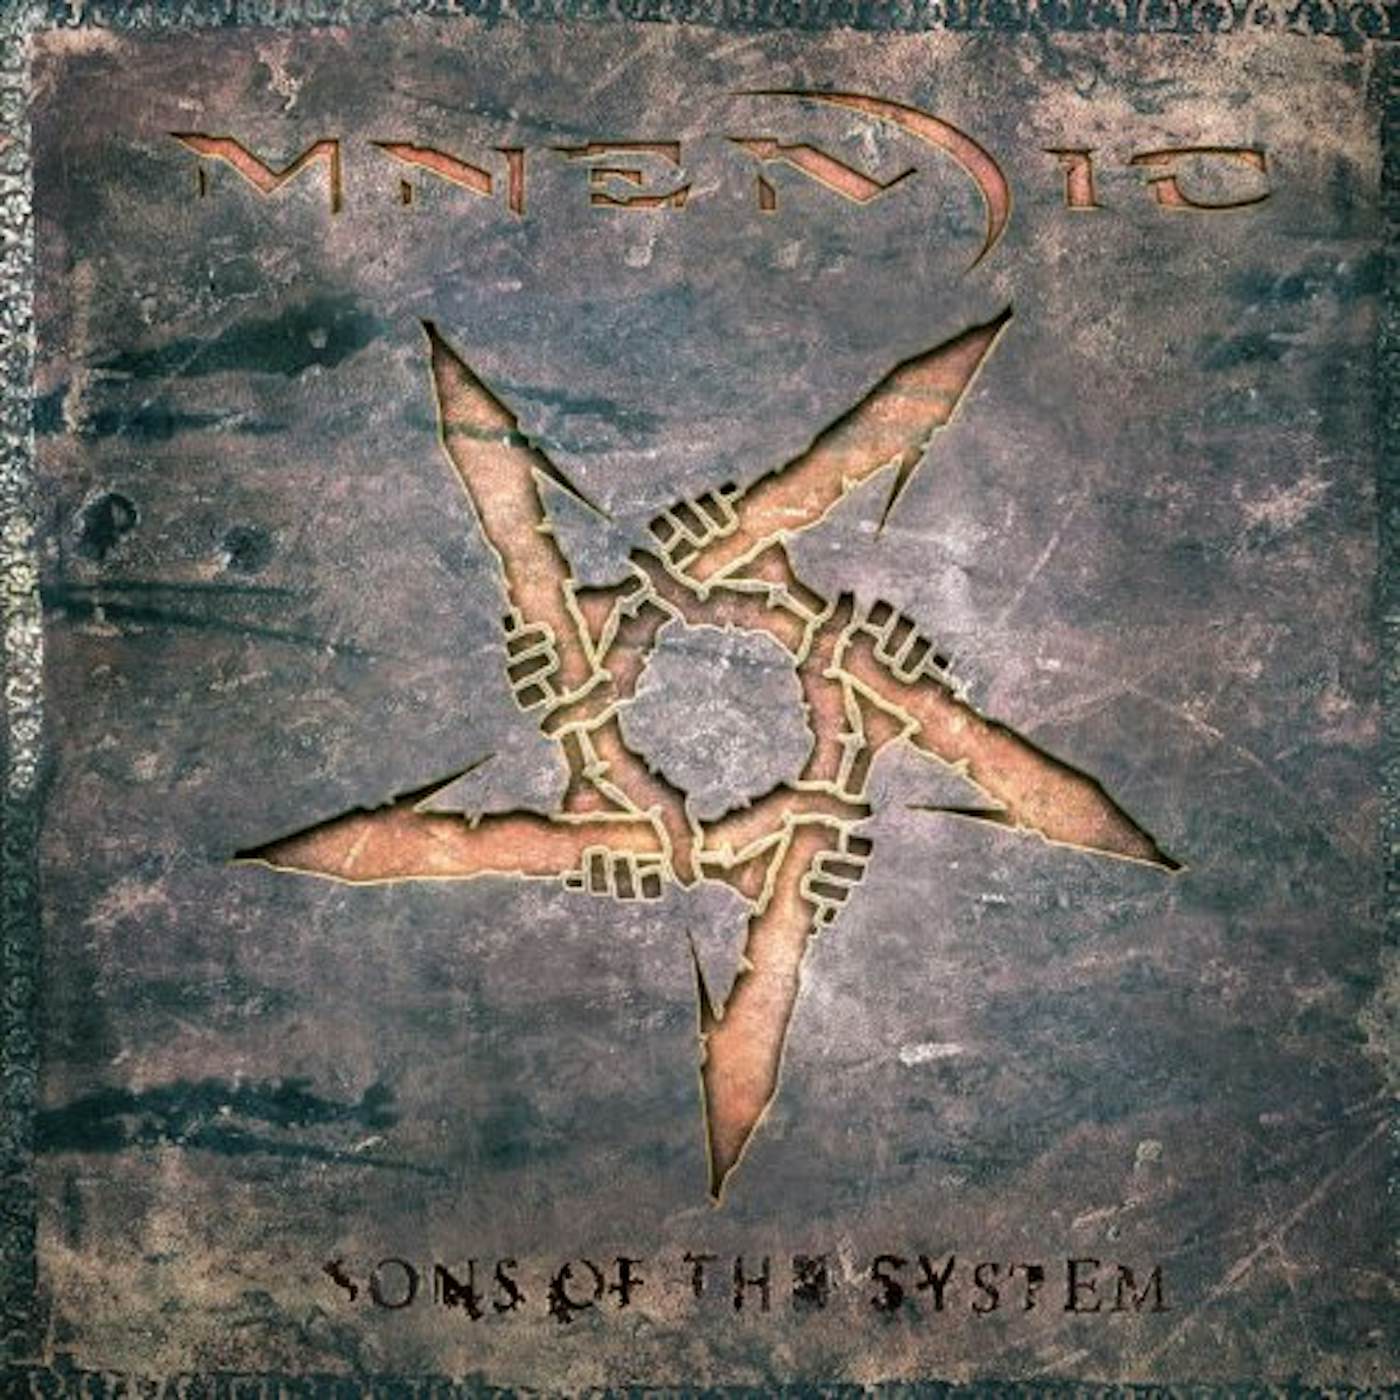 Mnemic SONS OF THE SYSTEM CD